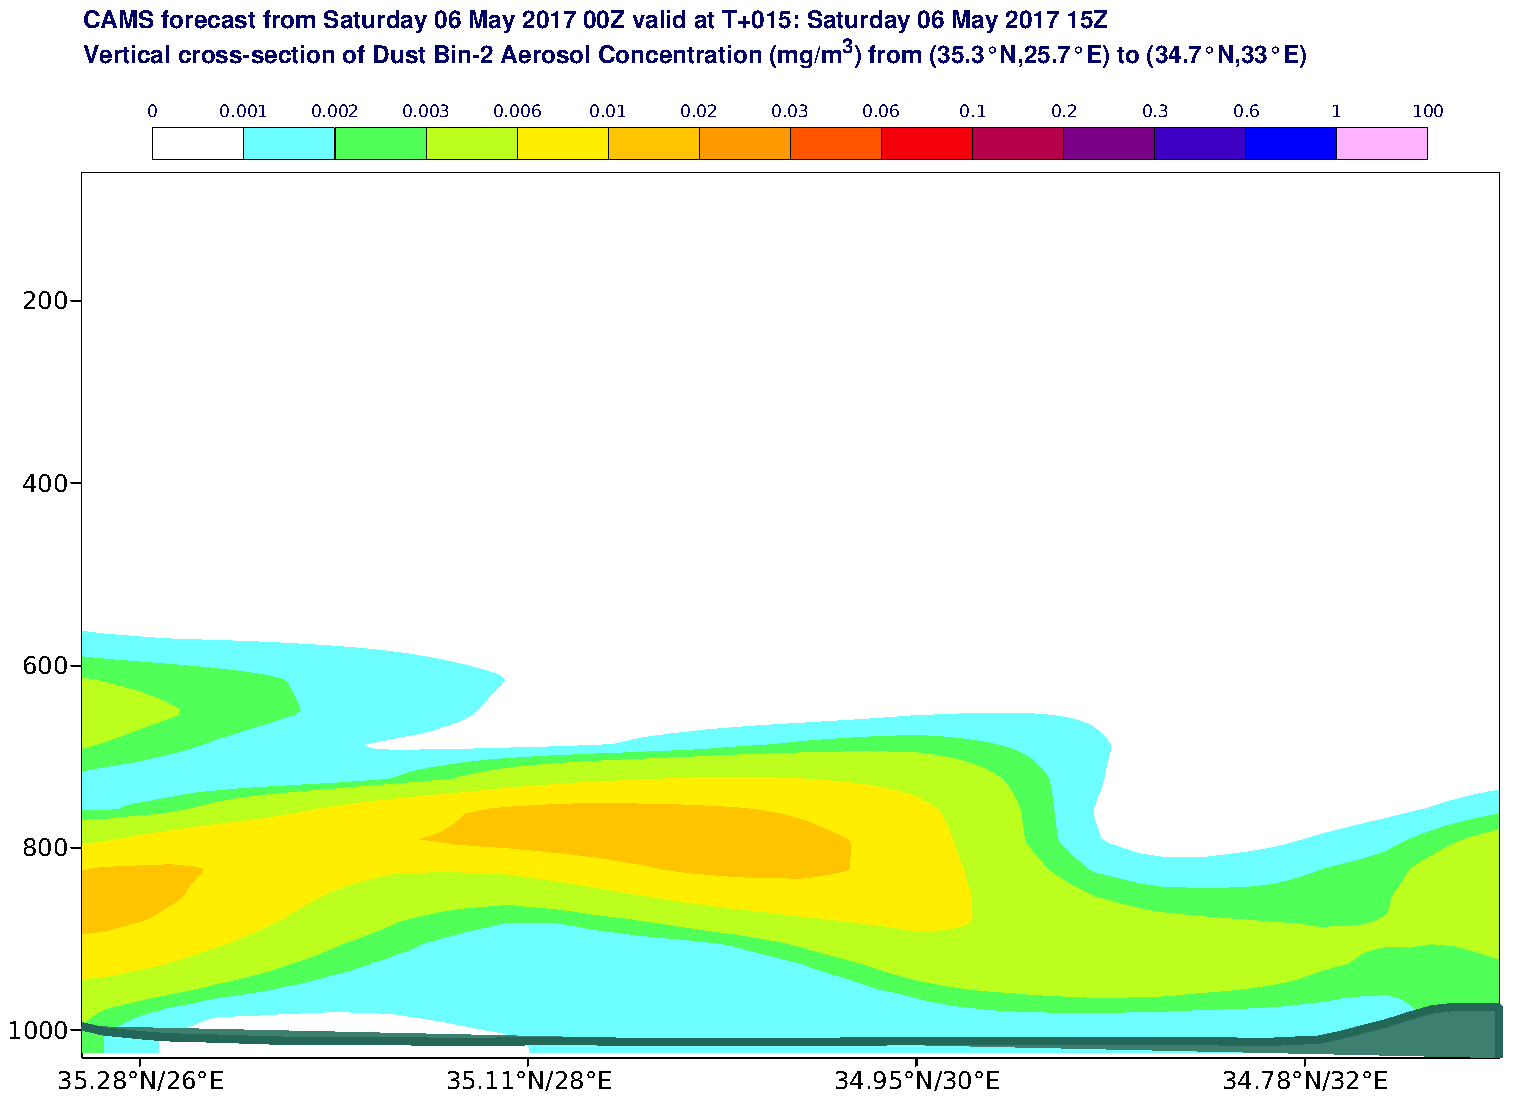 Vertical cross-section of Dust Bin-2 Aerosol Concentration (mg/m3) valid at T15 - 2017-05-06 15:00